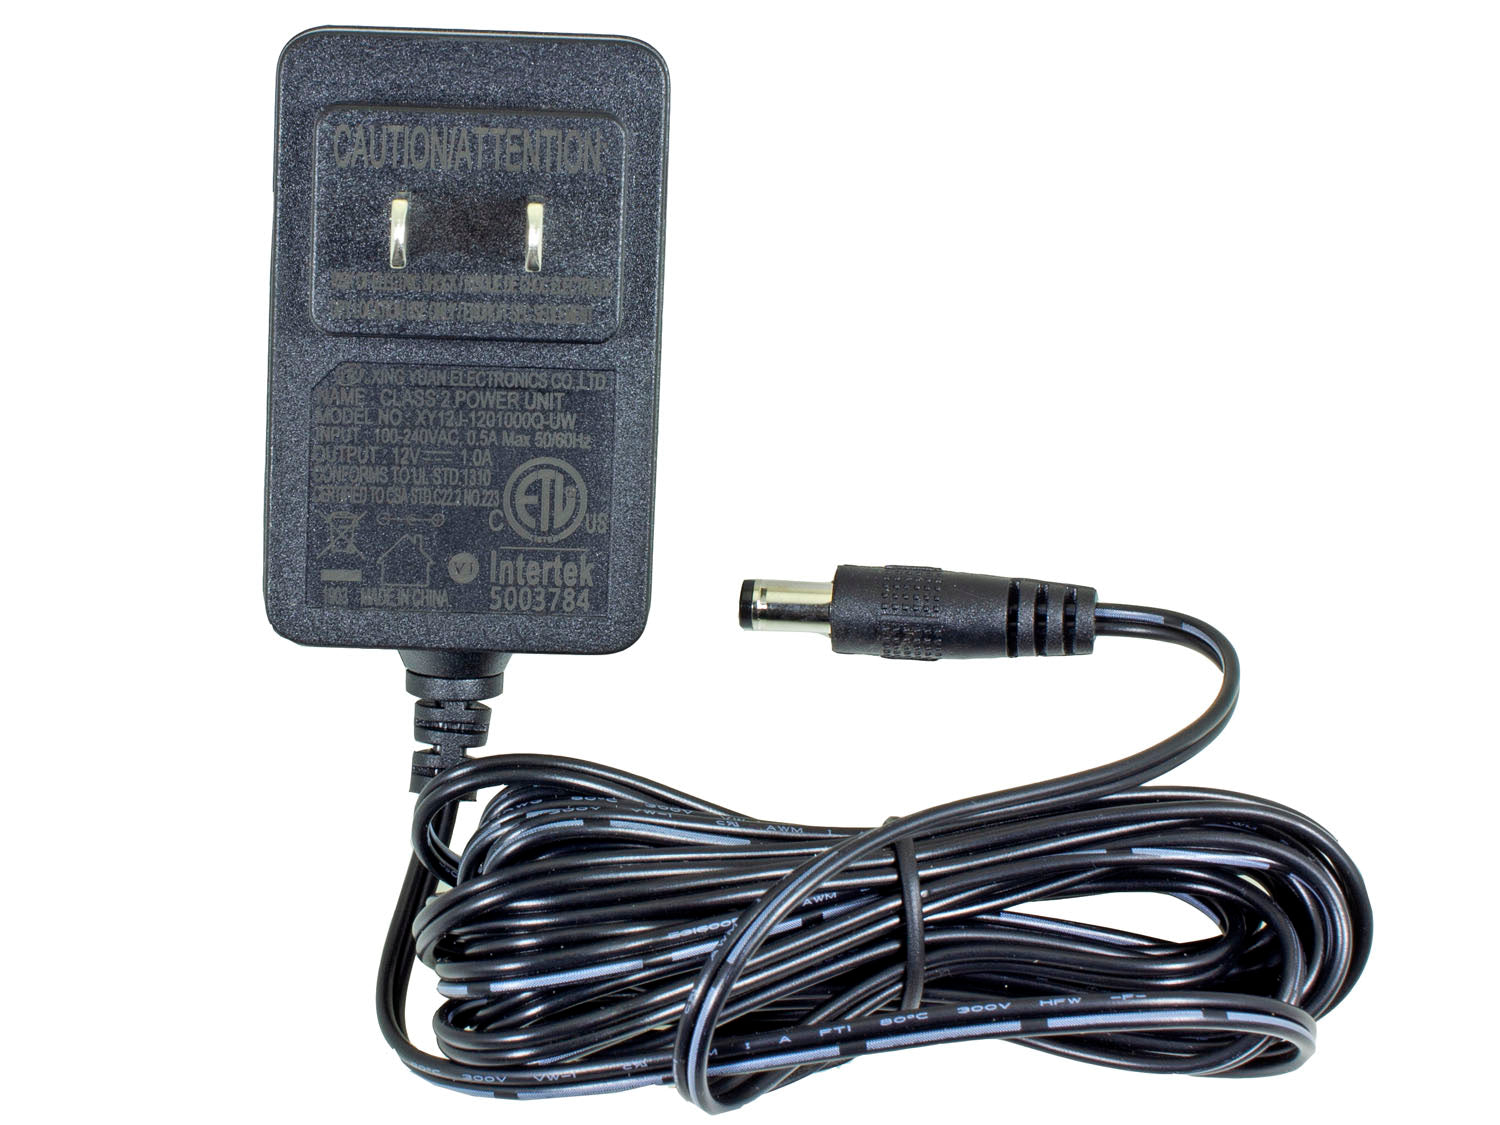 12V 1A DC US Power Supply – 3 Metre Cable